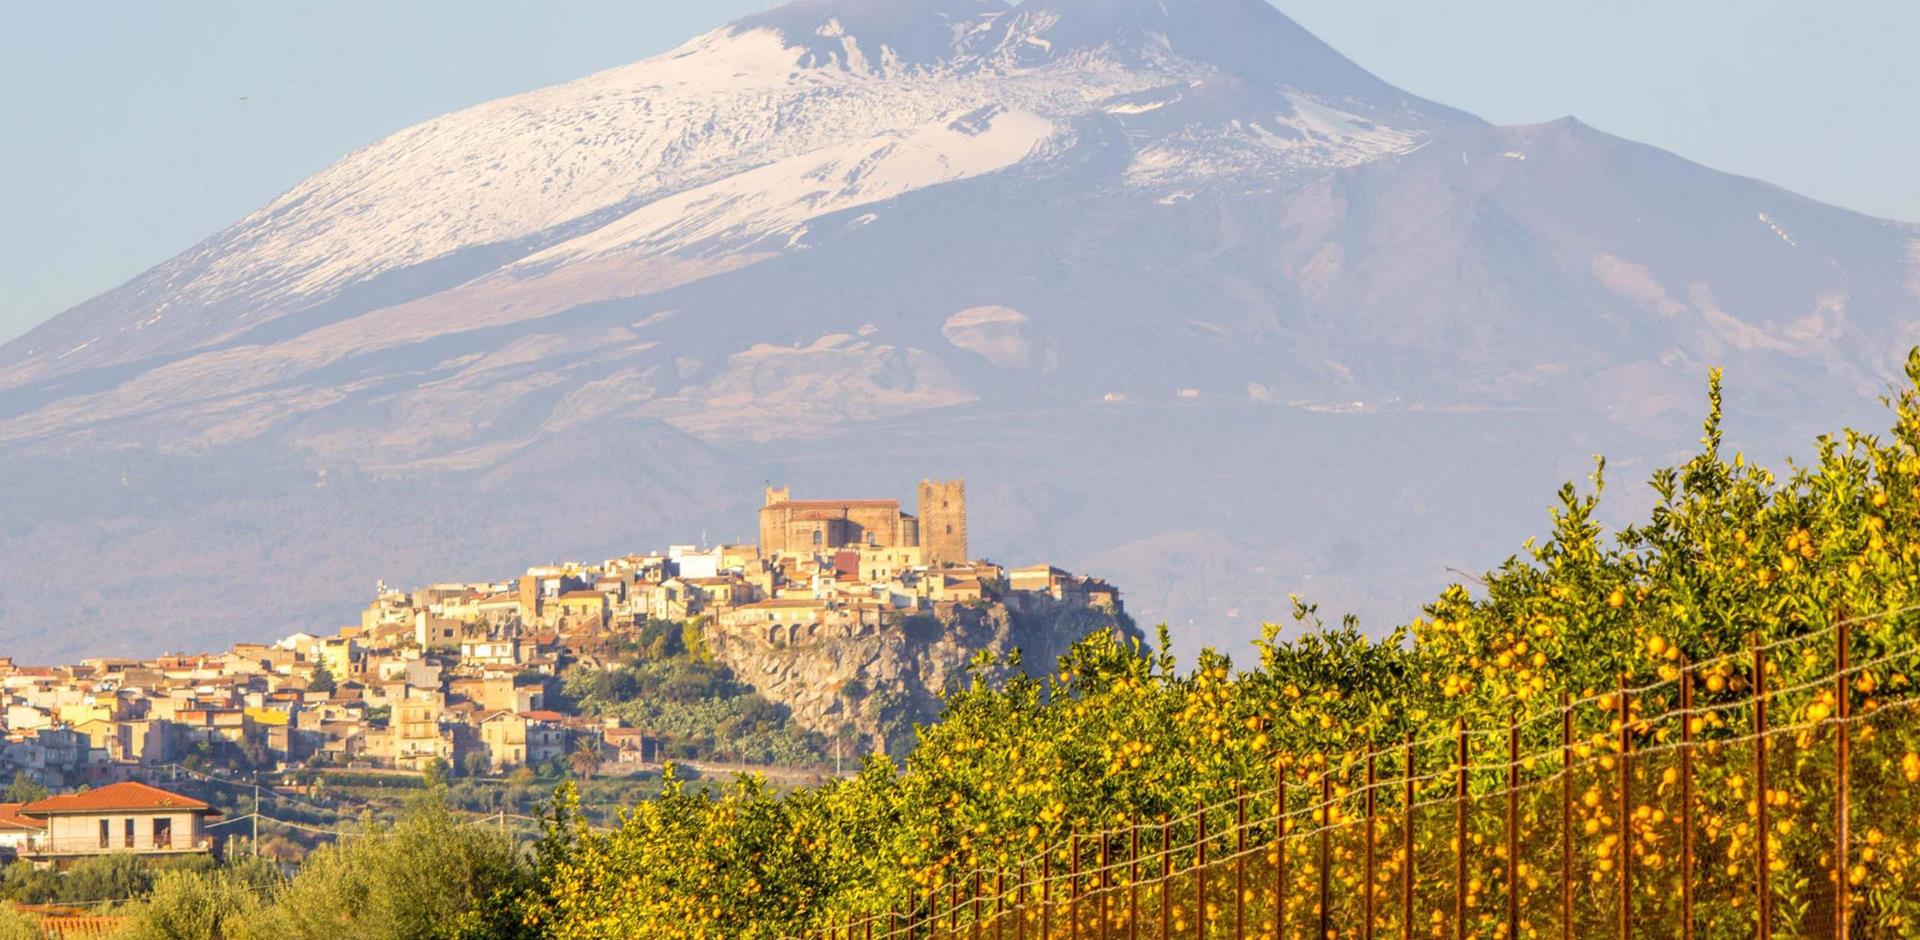 Explore Mount Etna by jeep